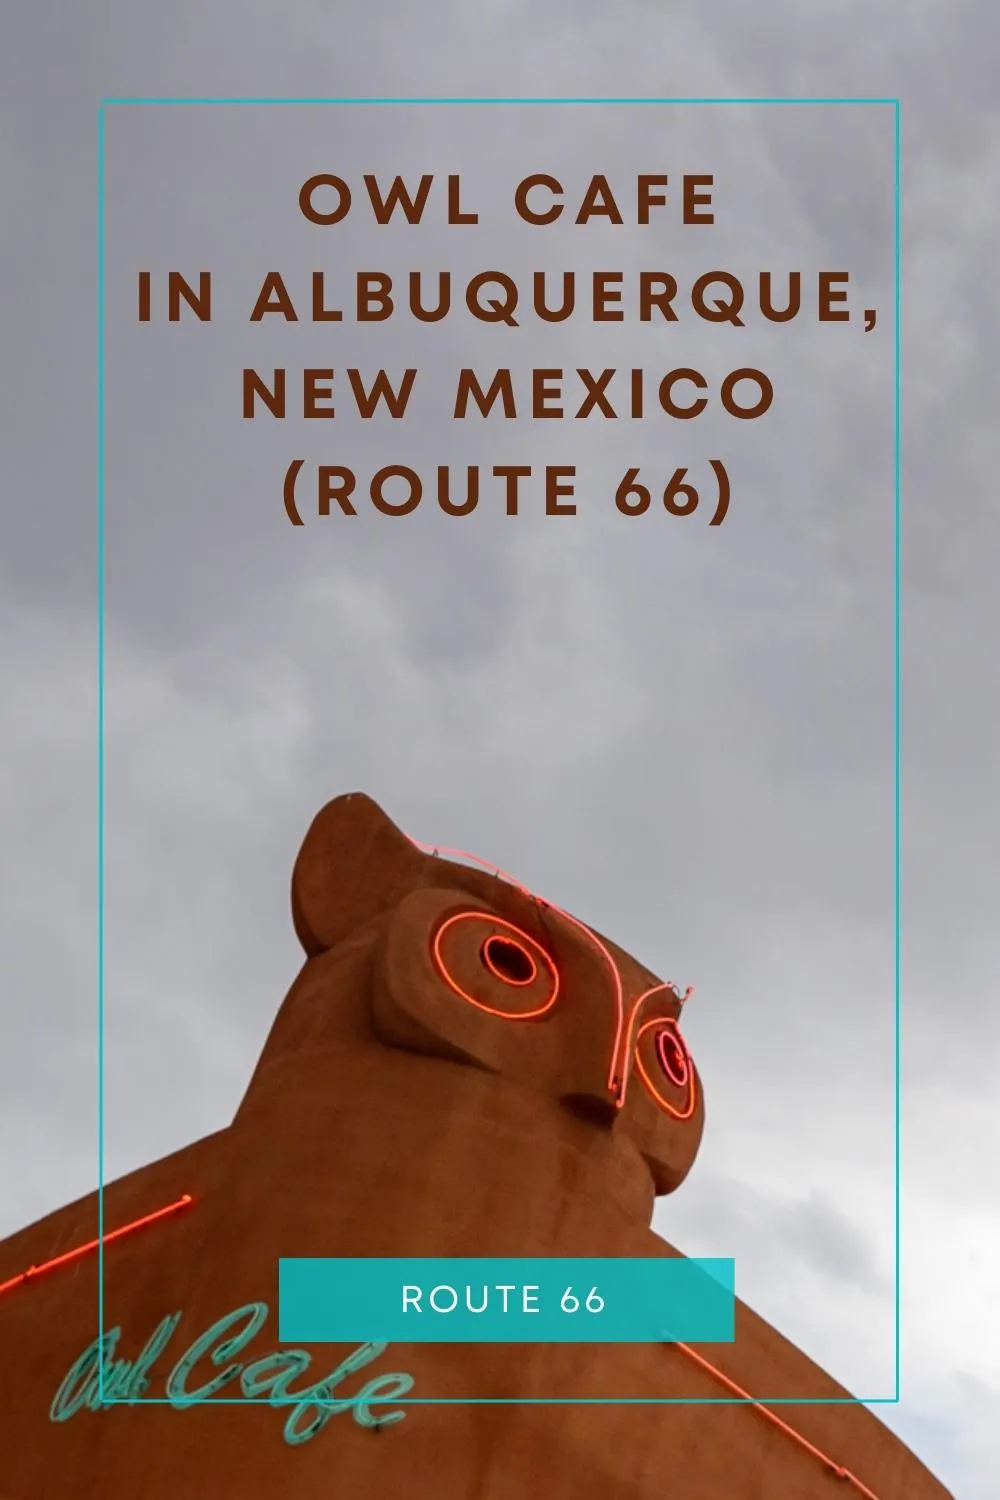 Roadside attraction? Check. Classic American diner? Check. Route 66 landmark? Check. The Owl Cafe in Albuquerque, New Mexico is all of these things and more. If you give a hoot about your Arizona Route 66 road trip, stop here to admire the novelty architecture, snack on a green chile cheeseburger, and wash it all down with a famous milkshake. Stop by this fun Route 66 roadside attraction for breakfast, lunch, or dinner. #NewMexico #NewMexicoRoadTrip #Route66 #Route66RoadTrip #Albuquerque